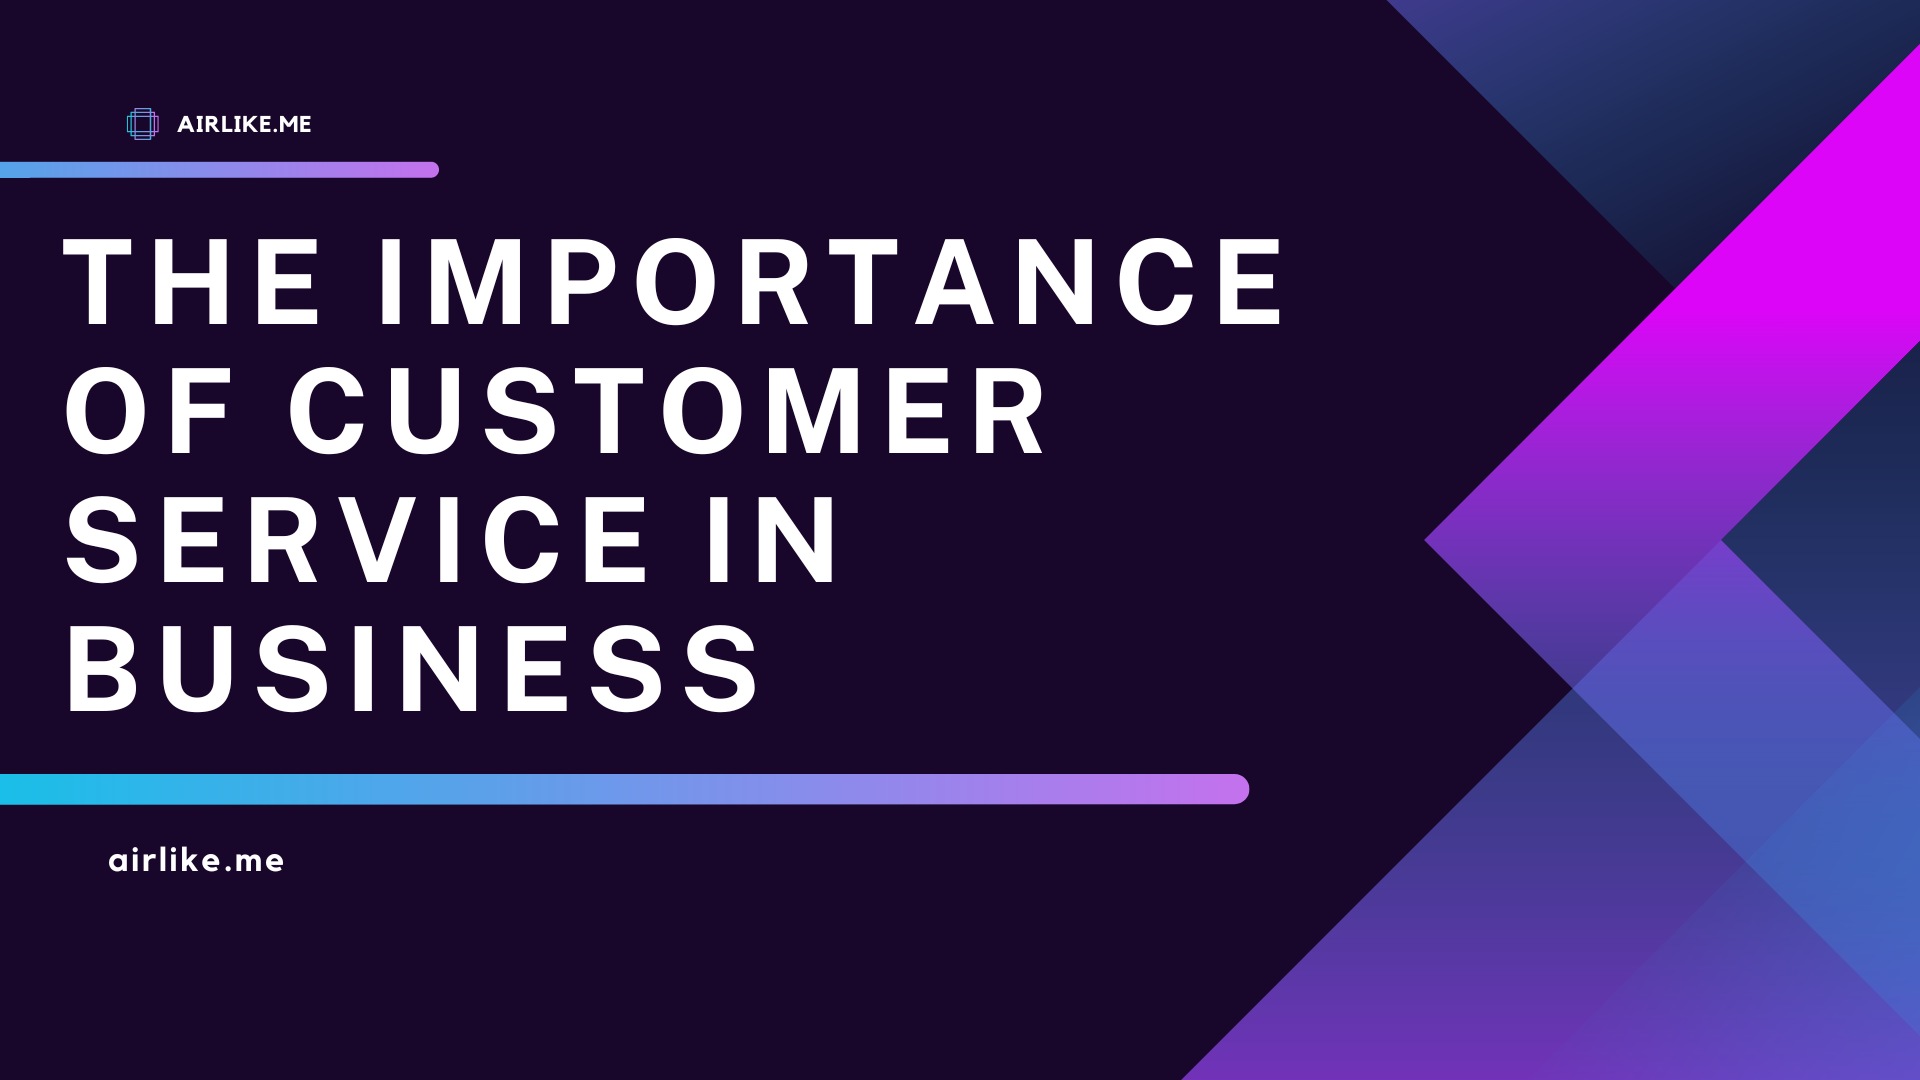 The Importance of Customer Service in Business